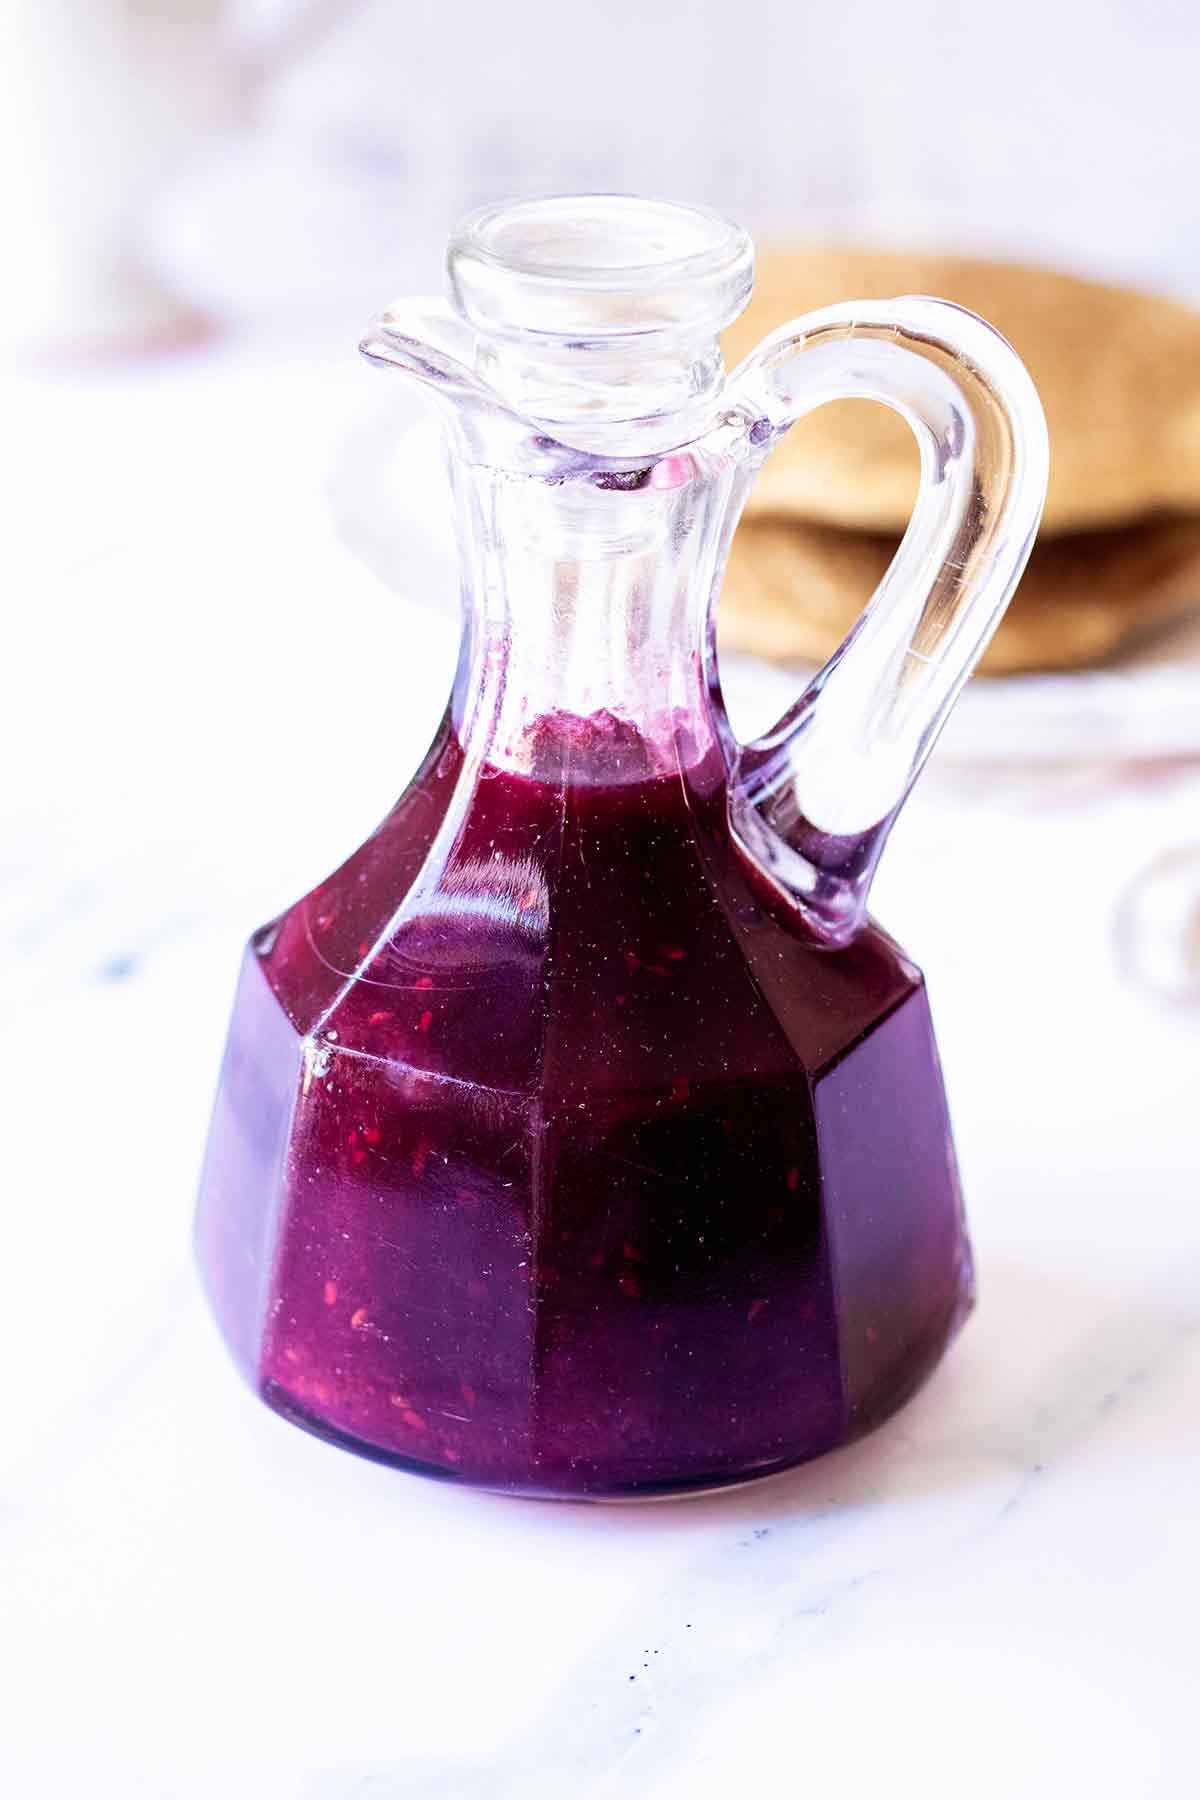 Syrup in a small glass carafe